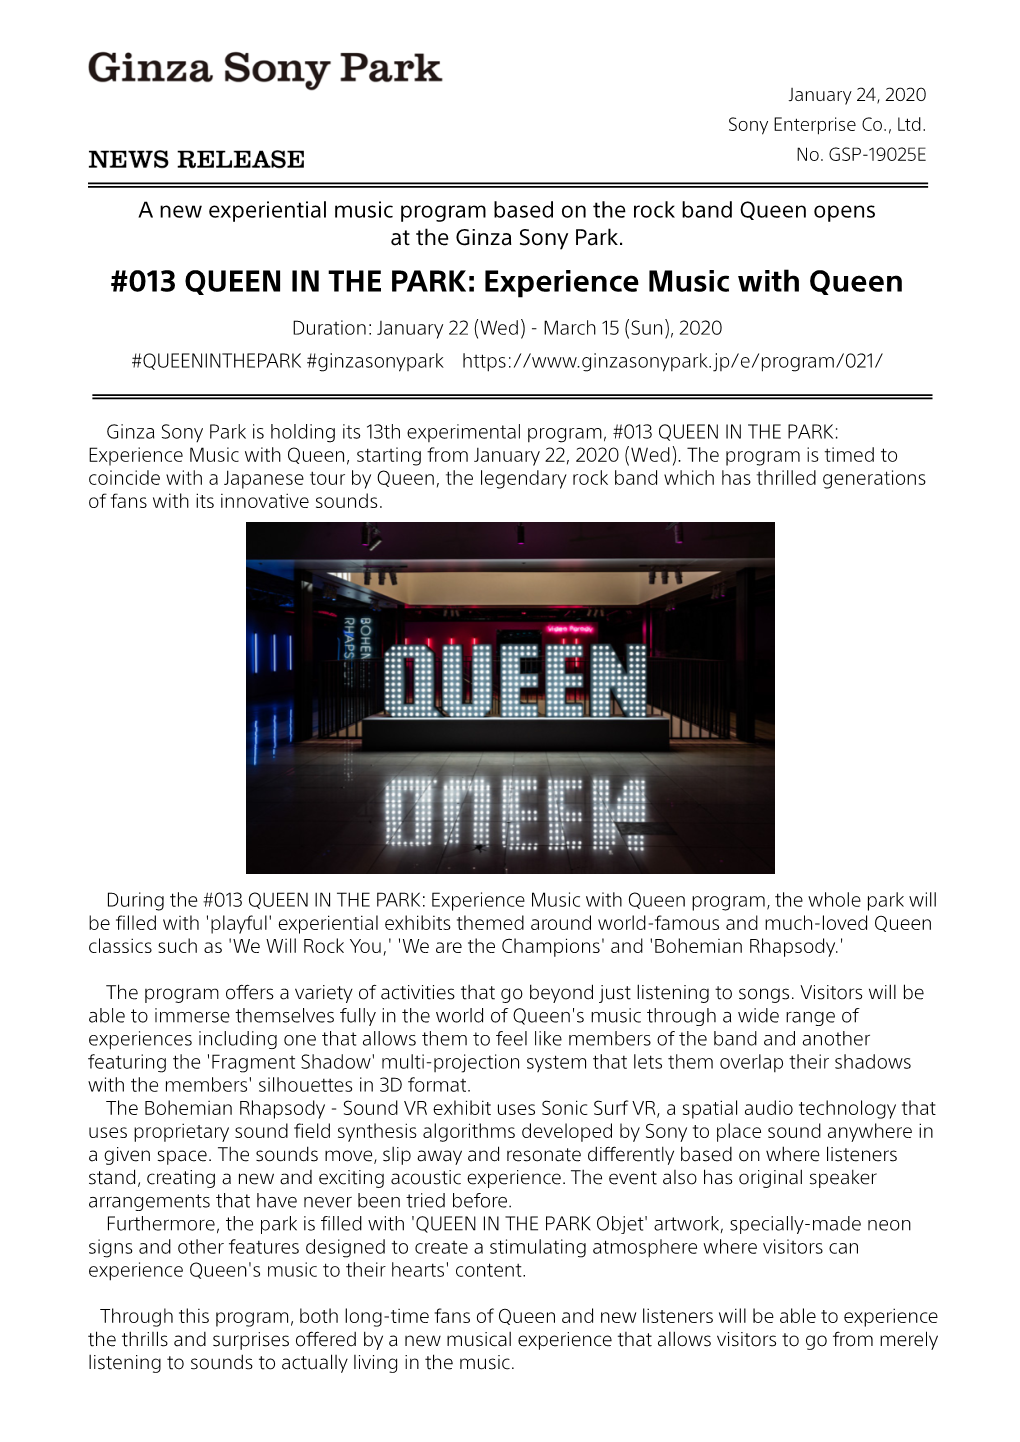 013 QUEEN in the PARK: Experience Music with Queen